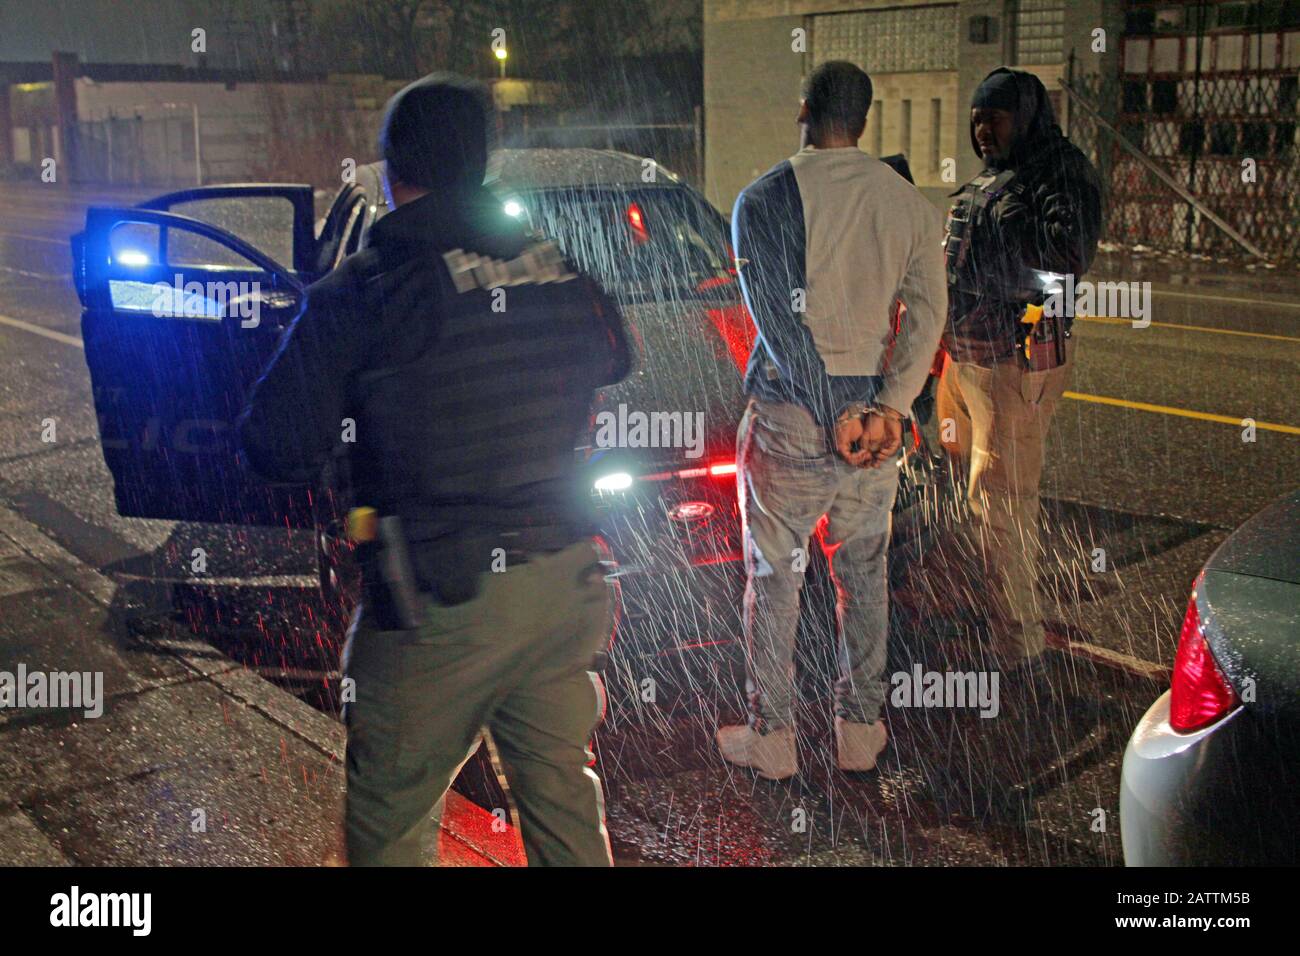 Detroit police Special stop a vehicle on a rainy night and detain the driver to carry out checks, Detroit, Michigan, USA Stock Photo